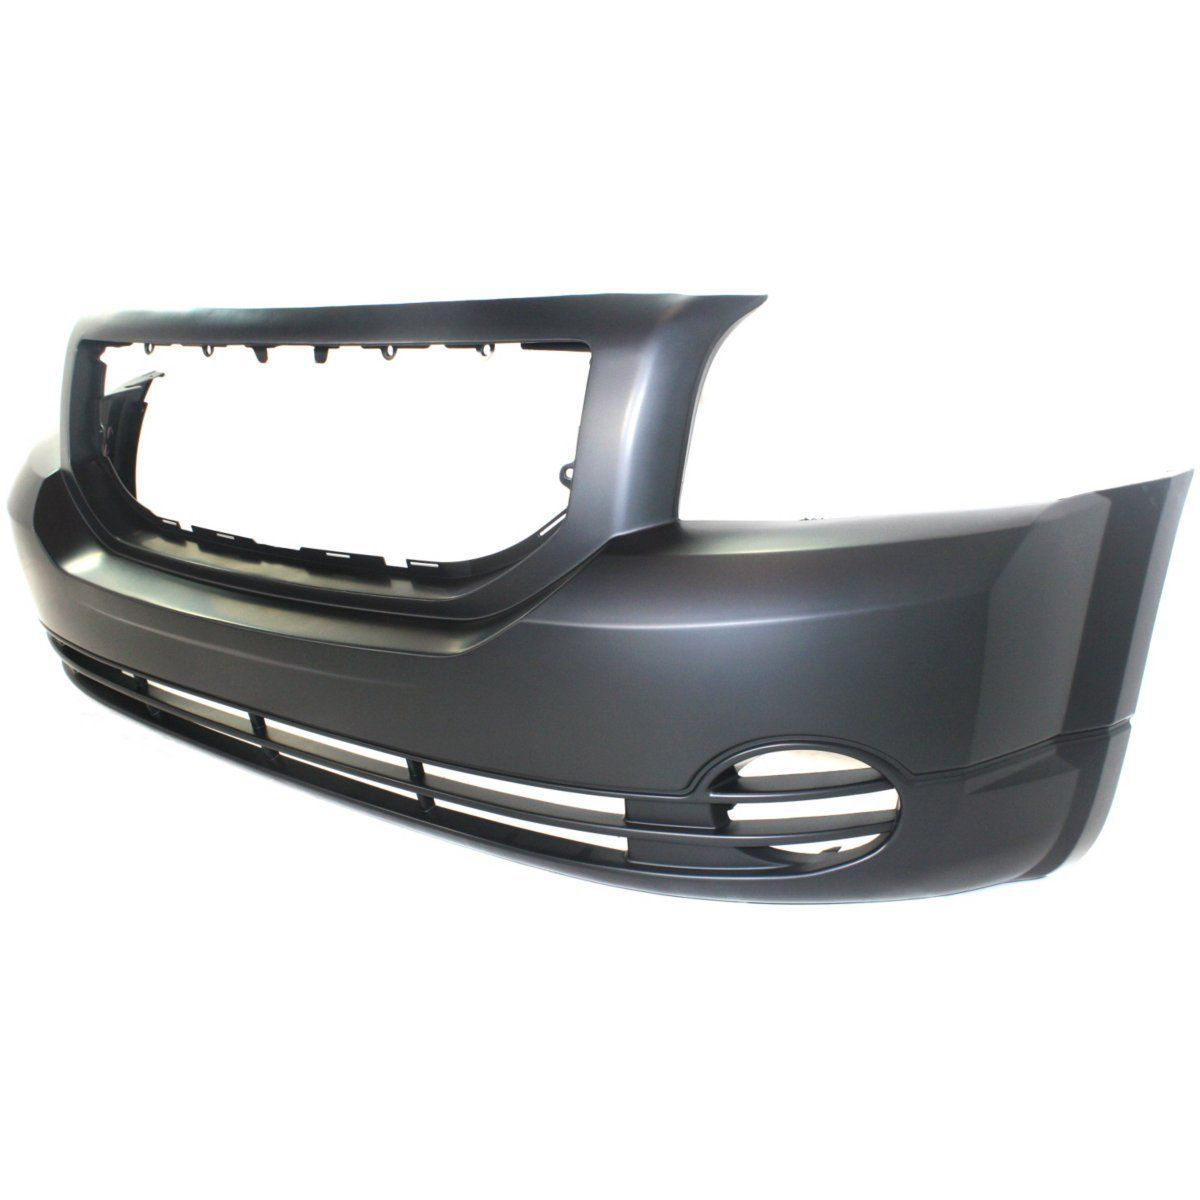 2007-2012 DODGE CALIBER Front Bumper Cover SE|SXT  w/o Fog Lamps  w/o Foam Absorber Painted to Match